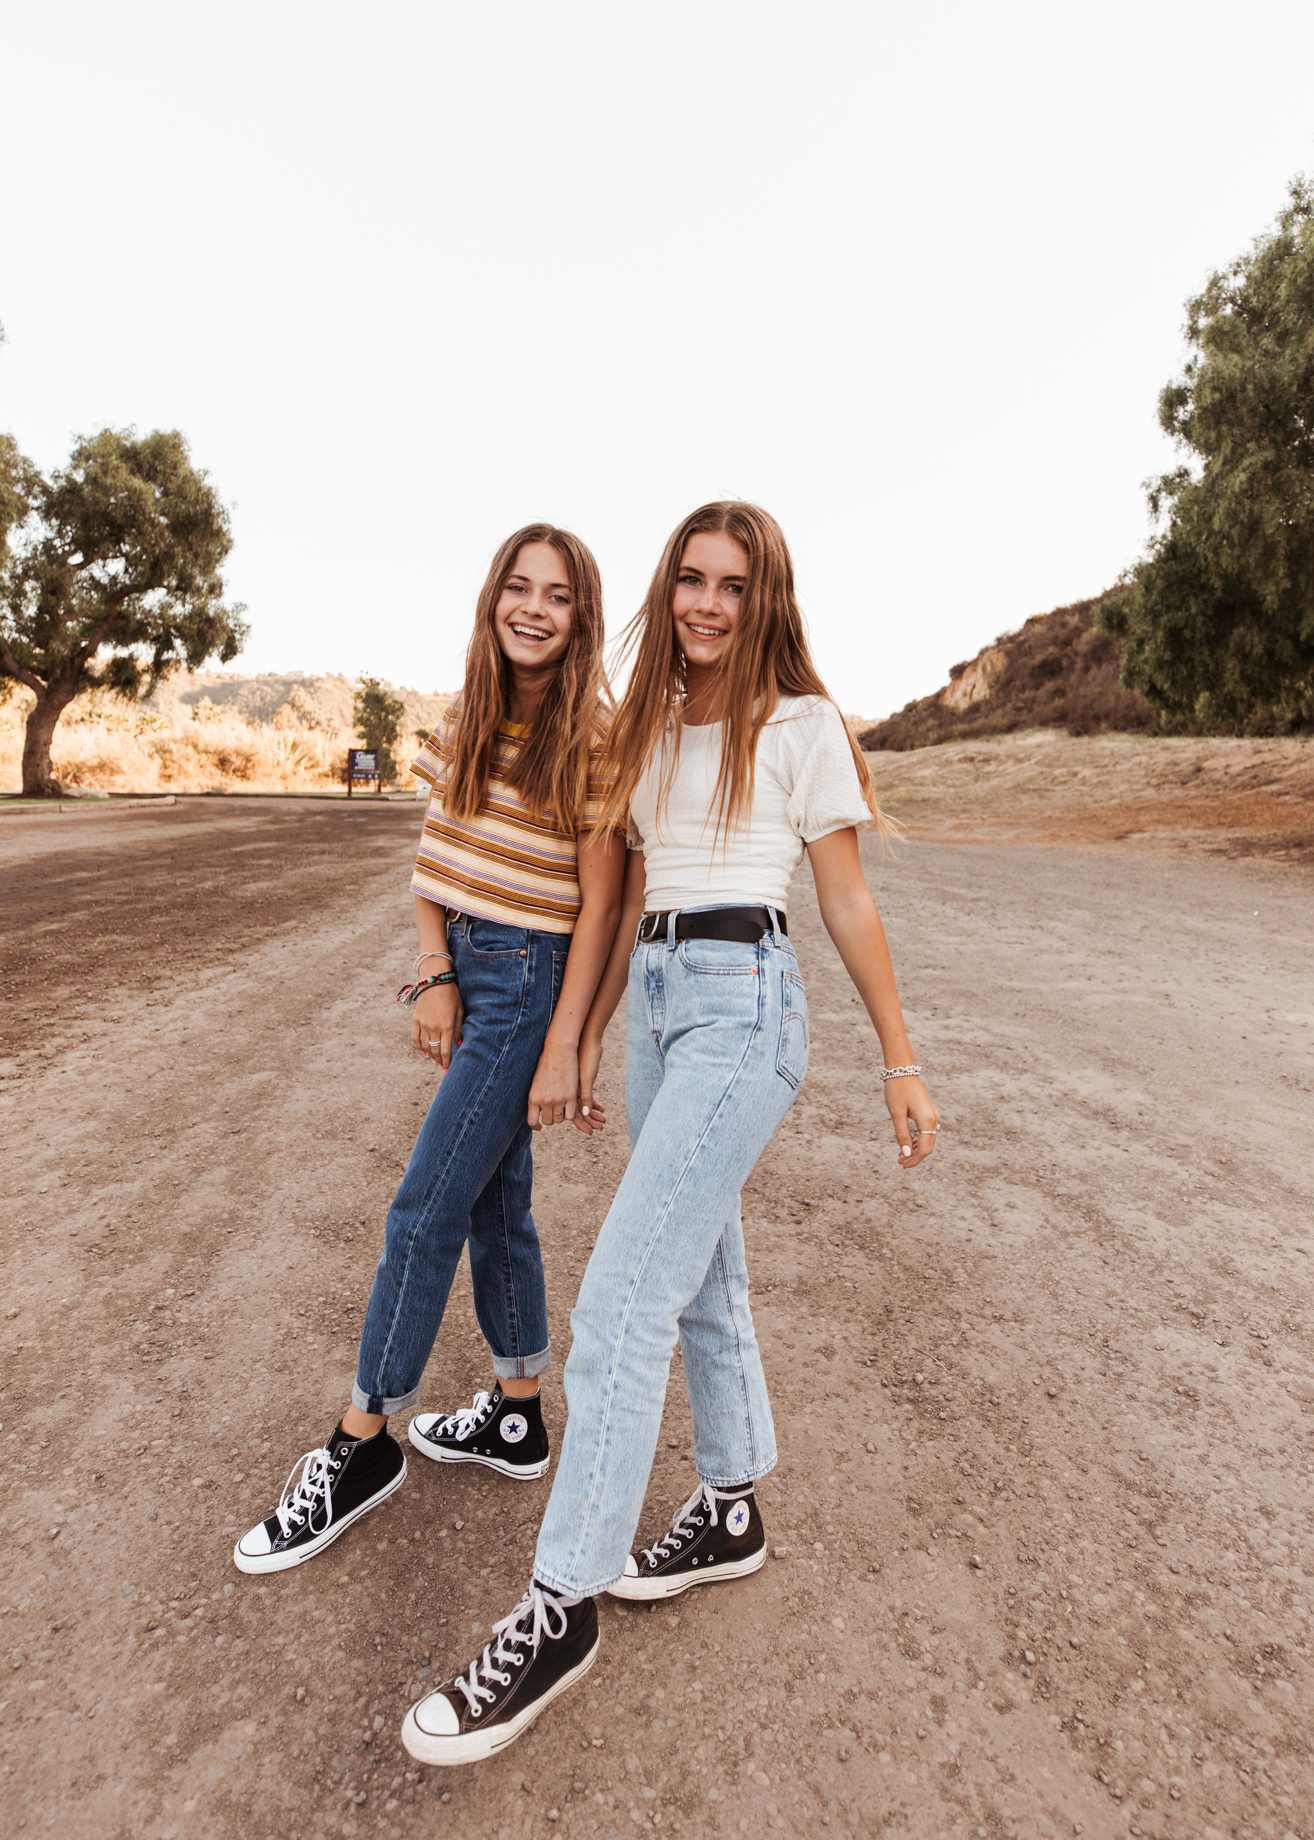 Gift Guide For Teens Holiday 2019 - Blog by Salty Lashes